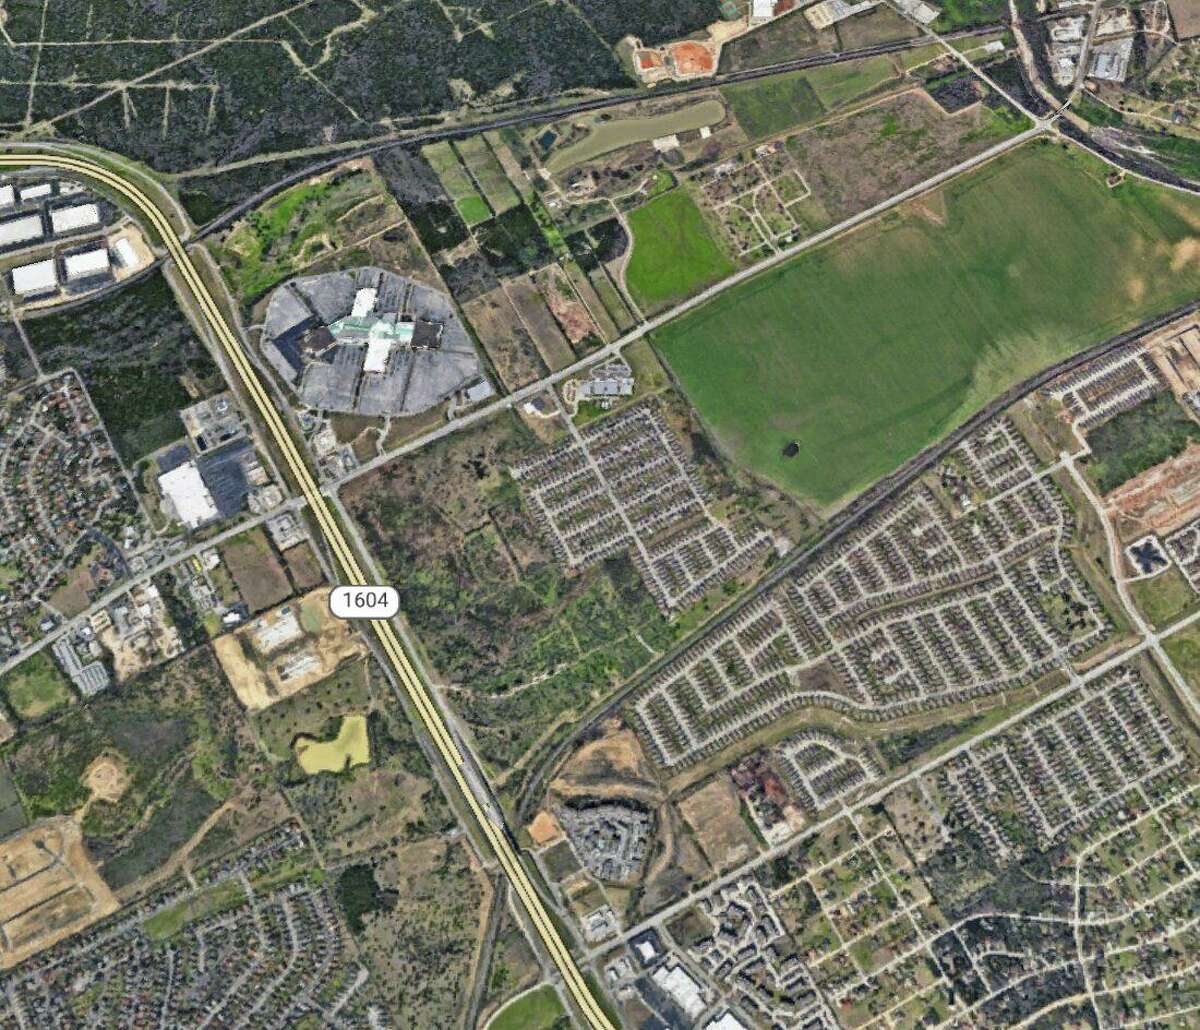 CanAm 1604 LLC, a company affiliated with USAA Real Estate and Patrinely Group, recently bought 125.7 acres near Rolling Oaks Mall.